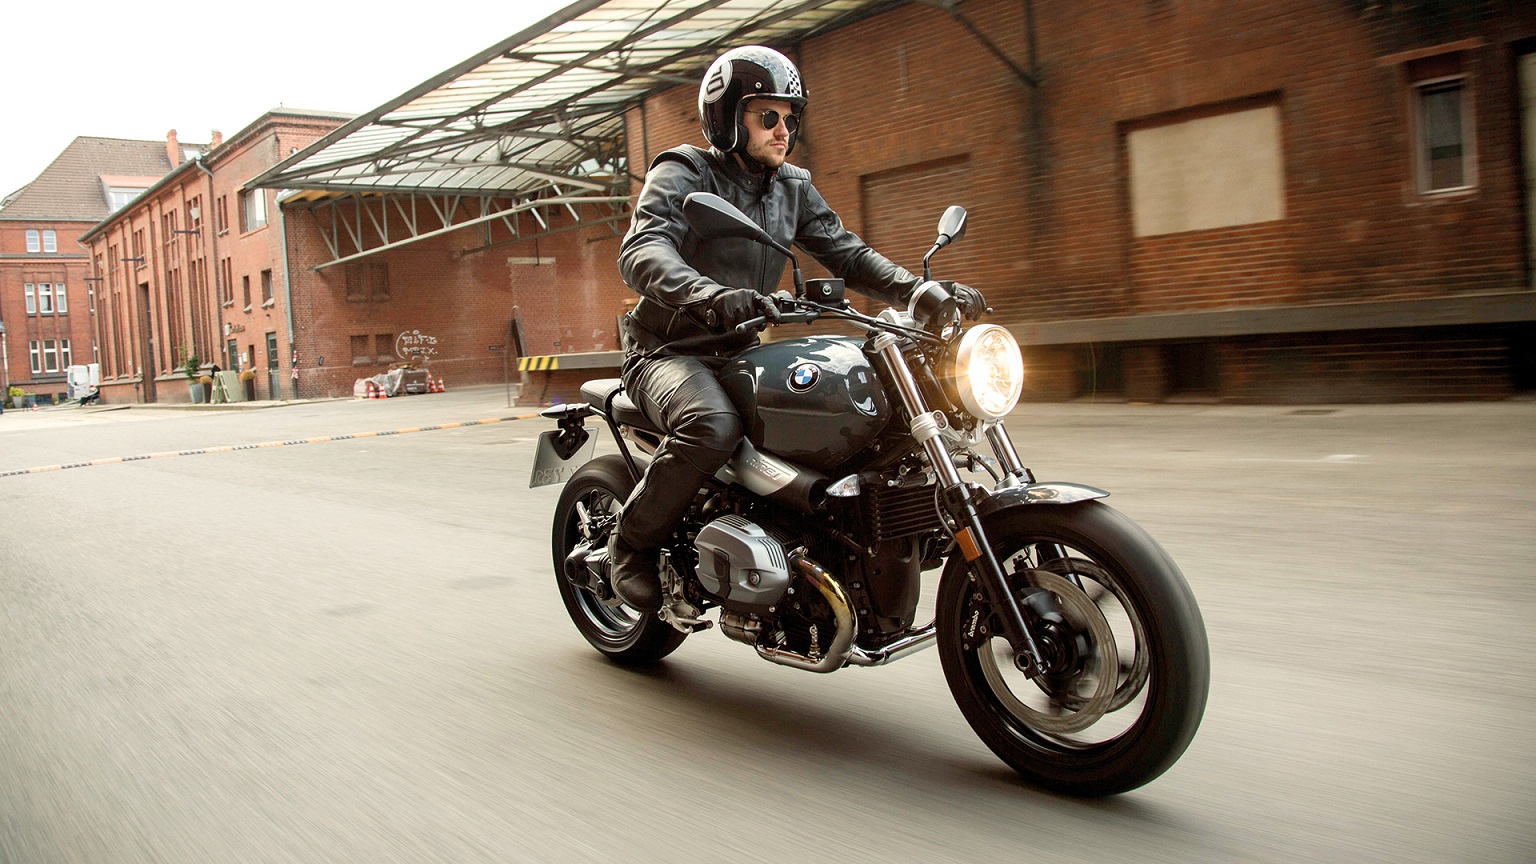 2020%20BMW%20R%20nineT%20Pure%20Exterior%20Front%20View%20Picture.jpg